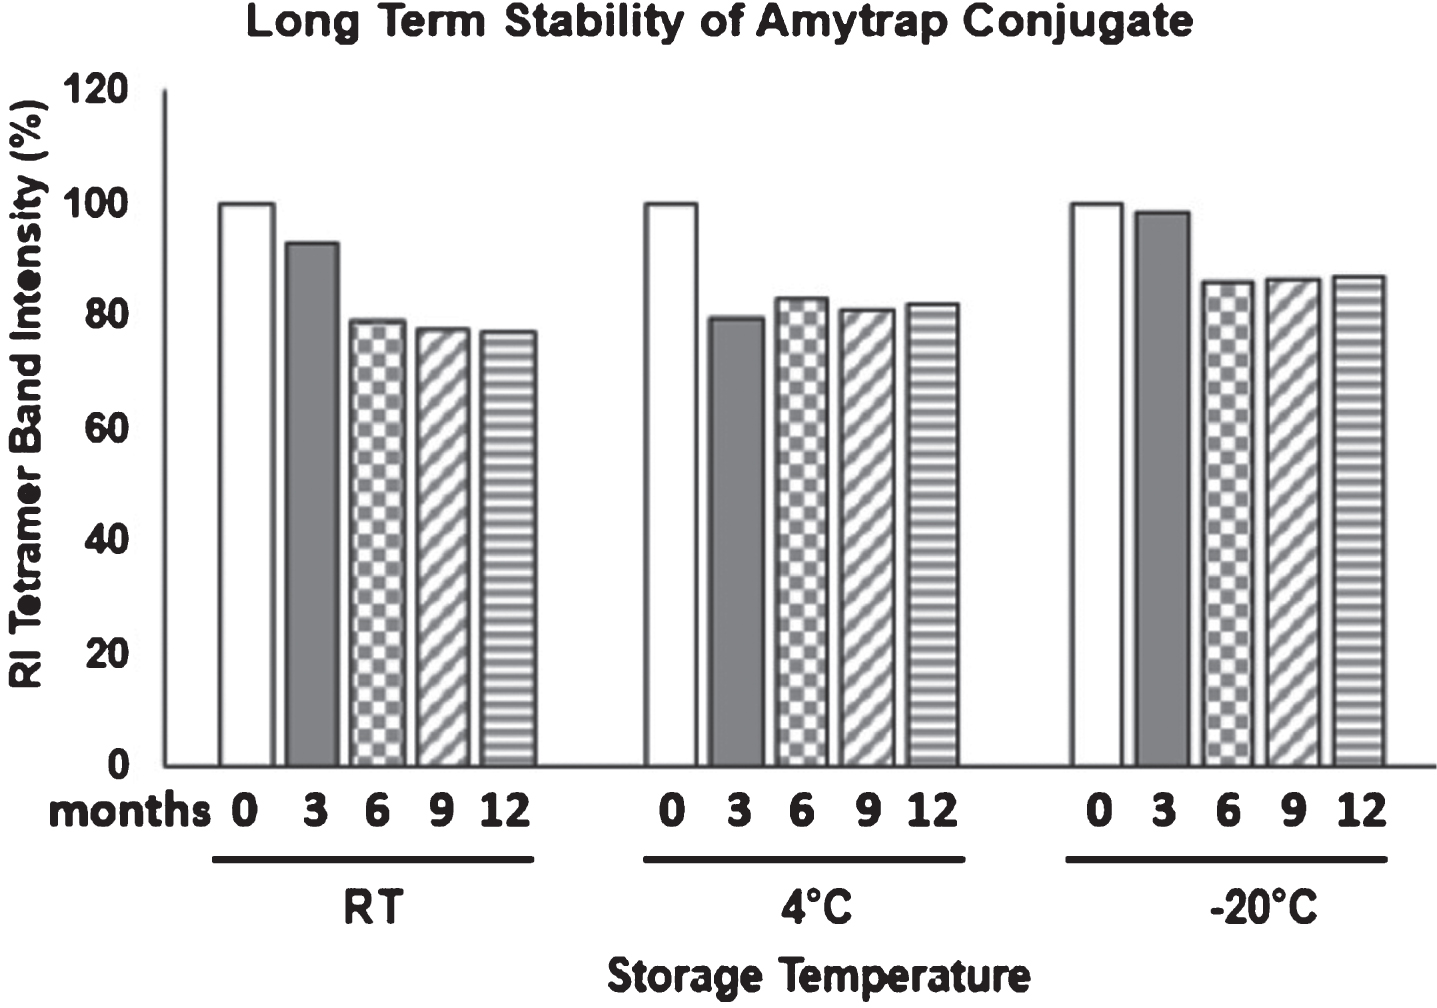 Long-term stability of Amytrap conjugate. Stability of Amytrap conjugate at RT, 4°C and -20°C was tested at 3, 6, 9, and 12 months as represented by tetramer band intensity on immunoblot. Samples were dissolved and analyzed by SDS-page. 3-month samples were taken as 100%.